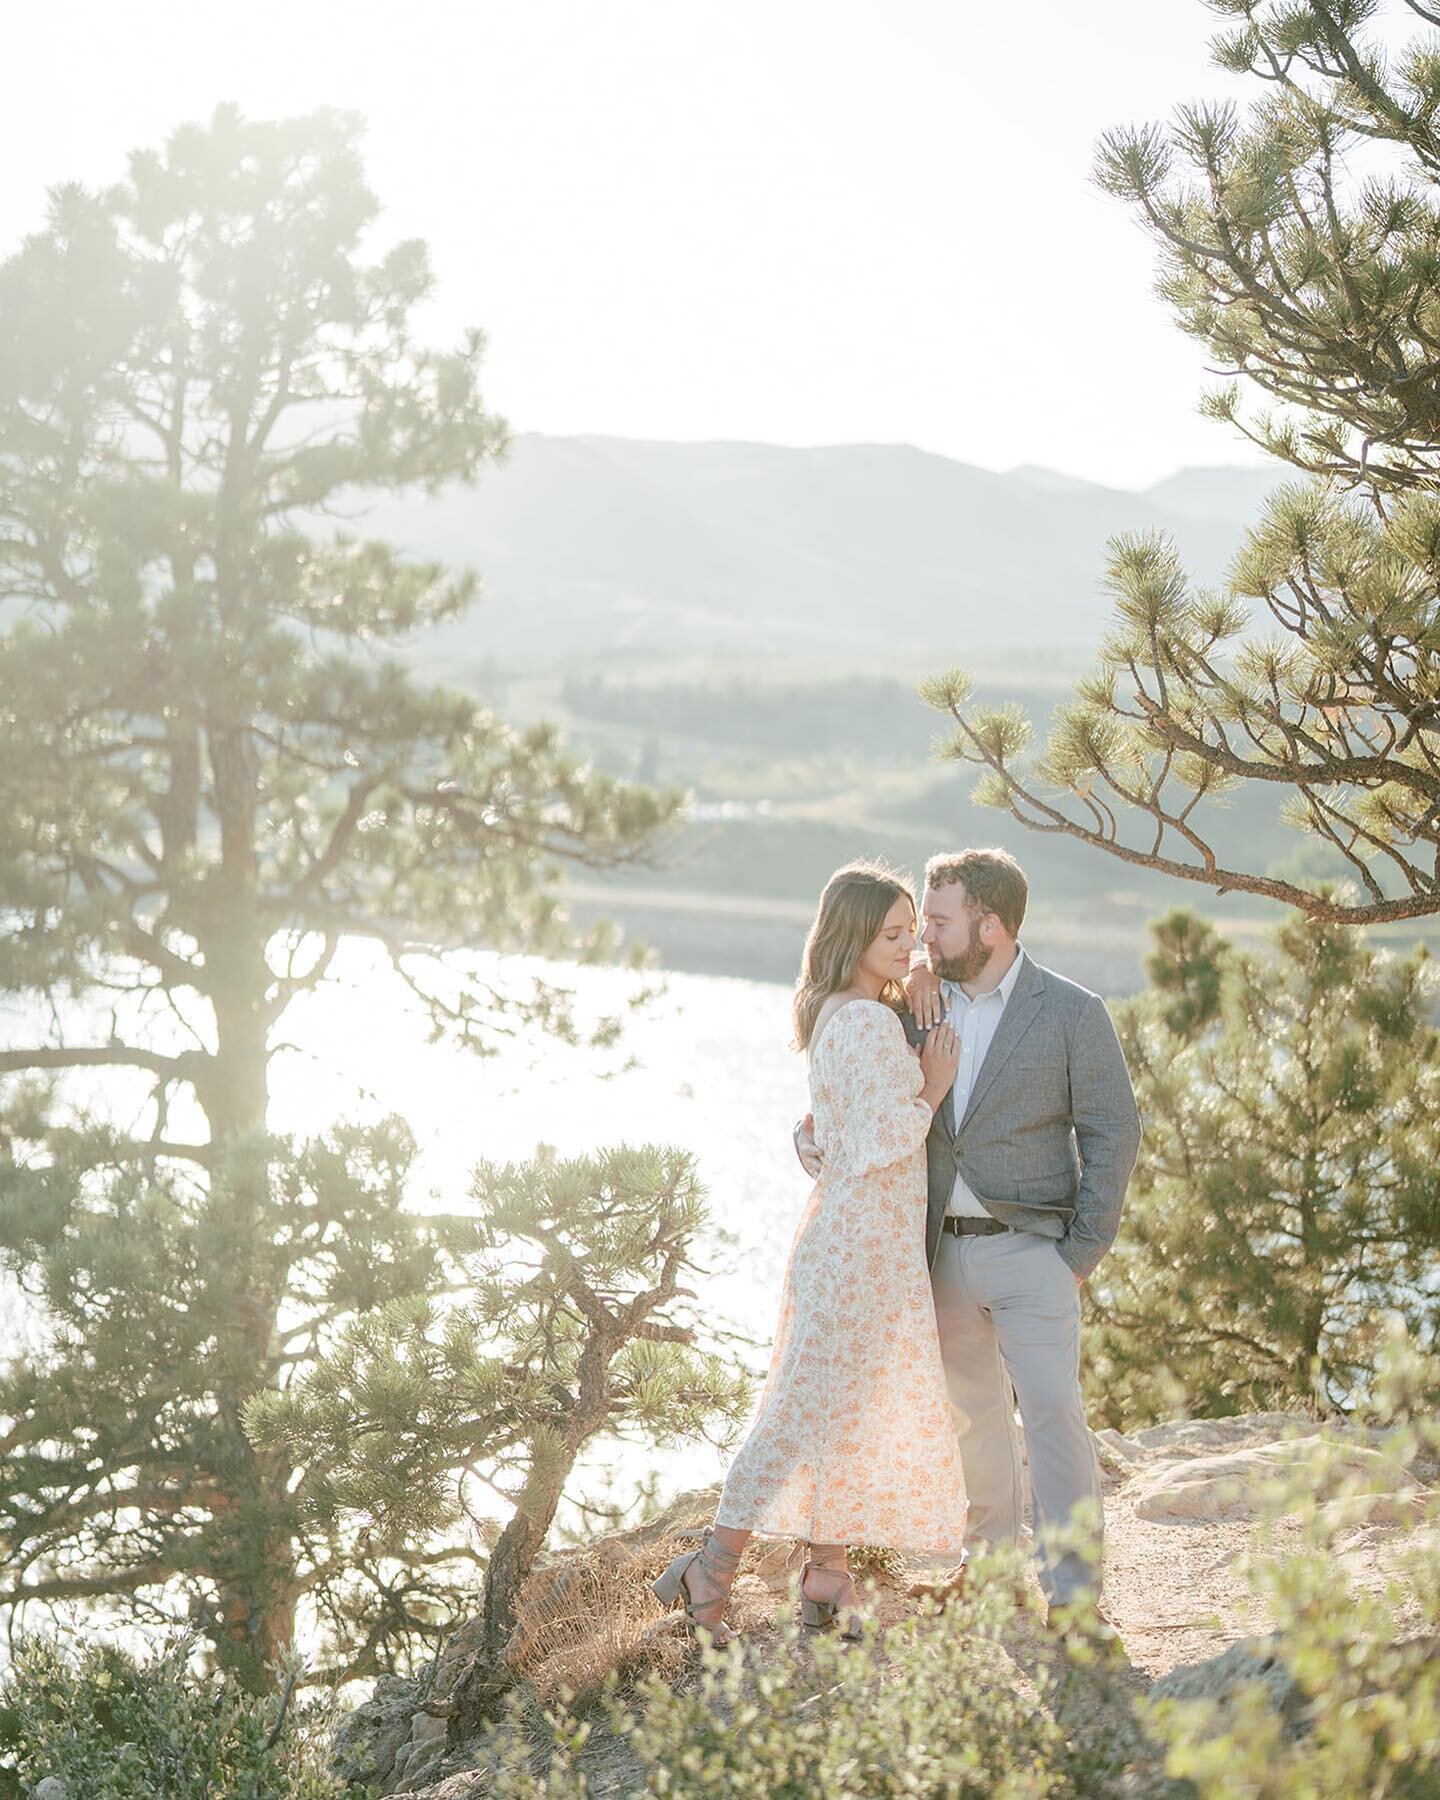 It&rsquo;s wedding week for Michelle &amp; Jake! Loved spending time with them in their hometown of Ft. Collins, Colorado for these Mountain views! #awpweddings
@nicoleallenevents 
#engaged #mountainlife